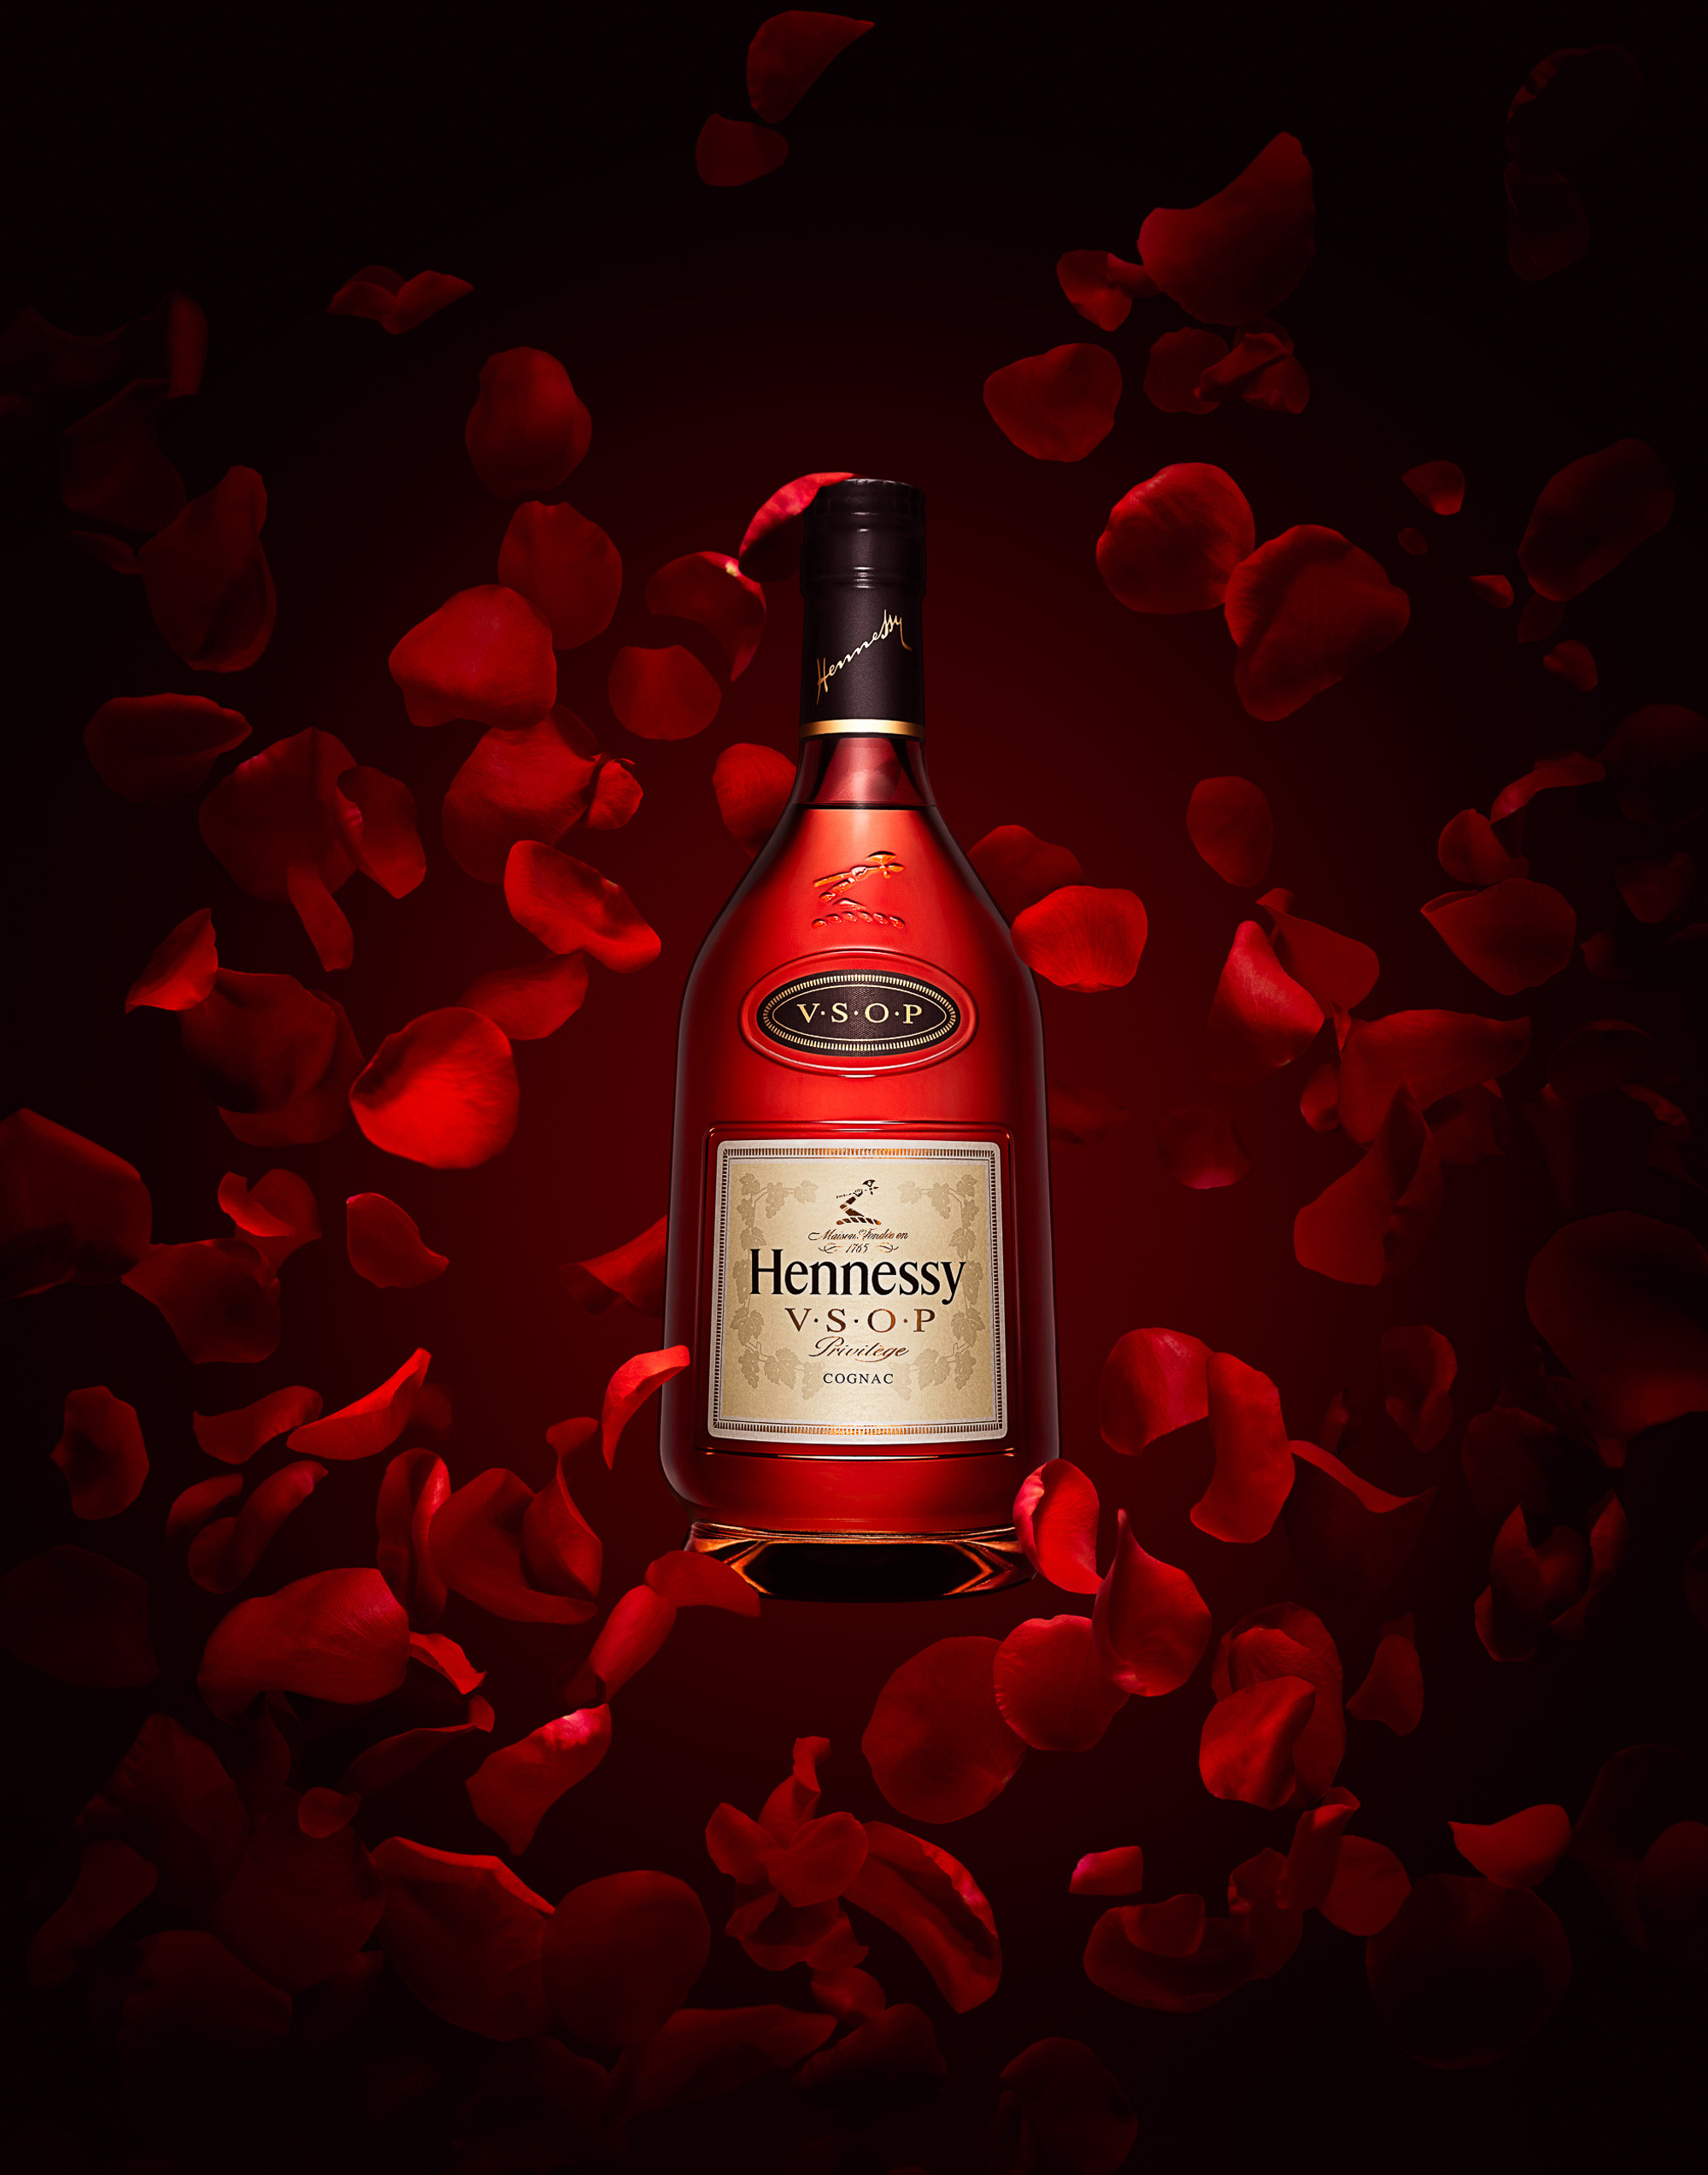 Bottle of Hennessy VSOP Cognac on deep red background with floating rose petals photographed by Timothy Hogan. 